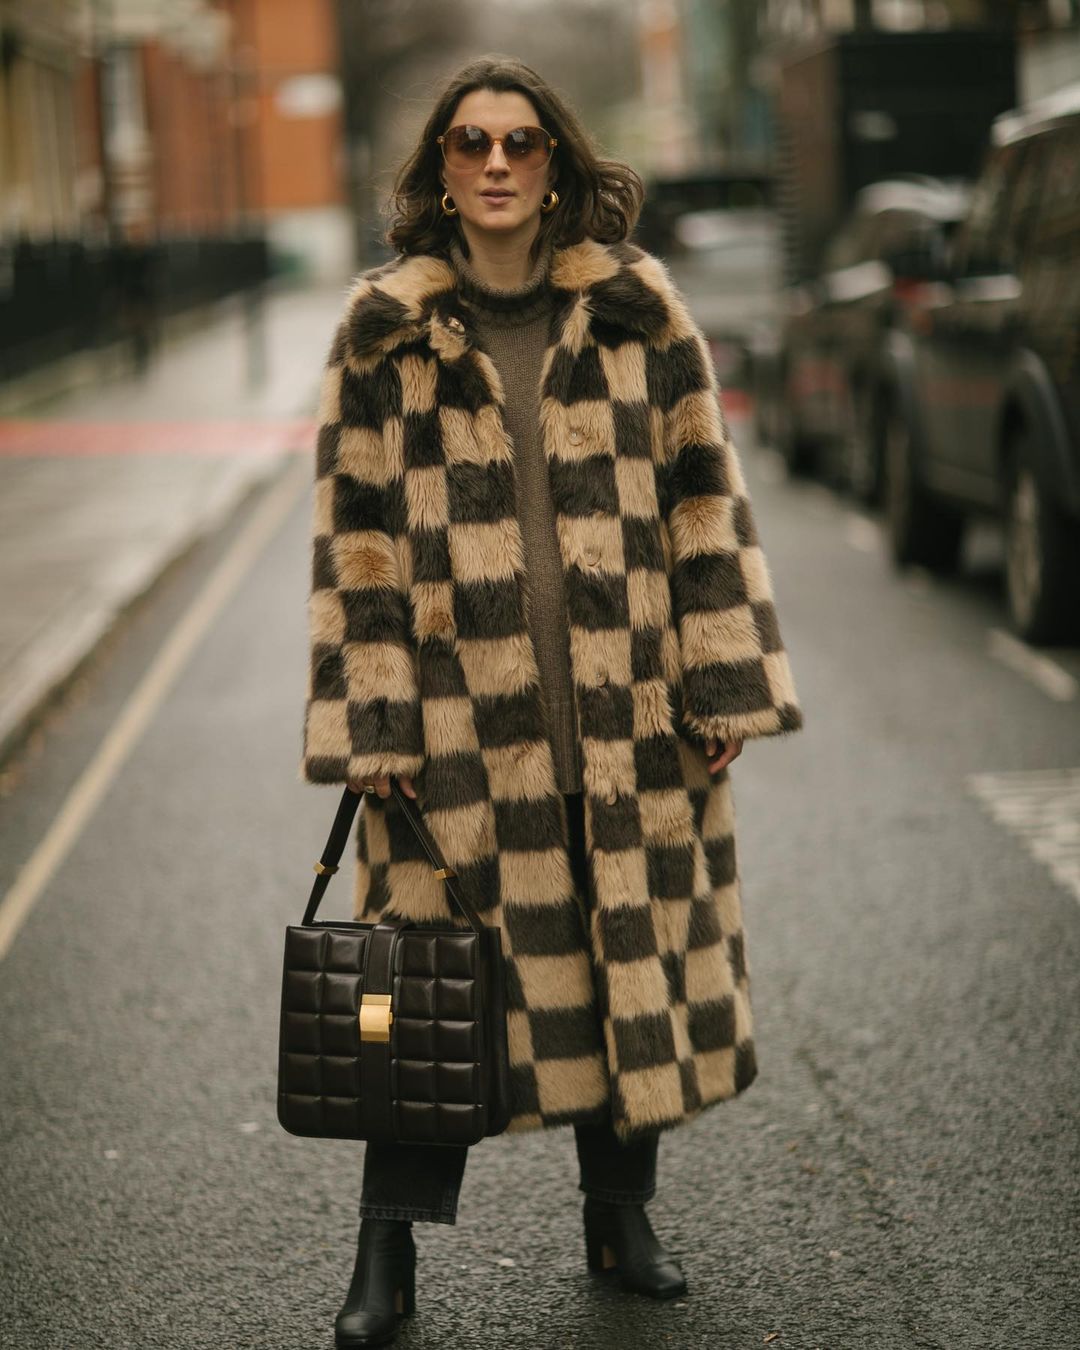 London Fashion Week Street Style That Will Make Your Head Turn